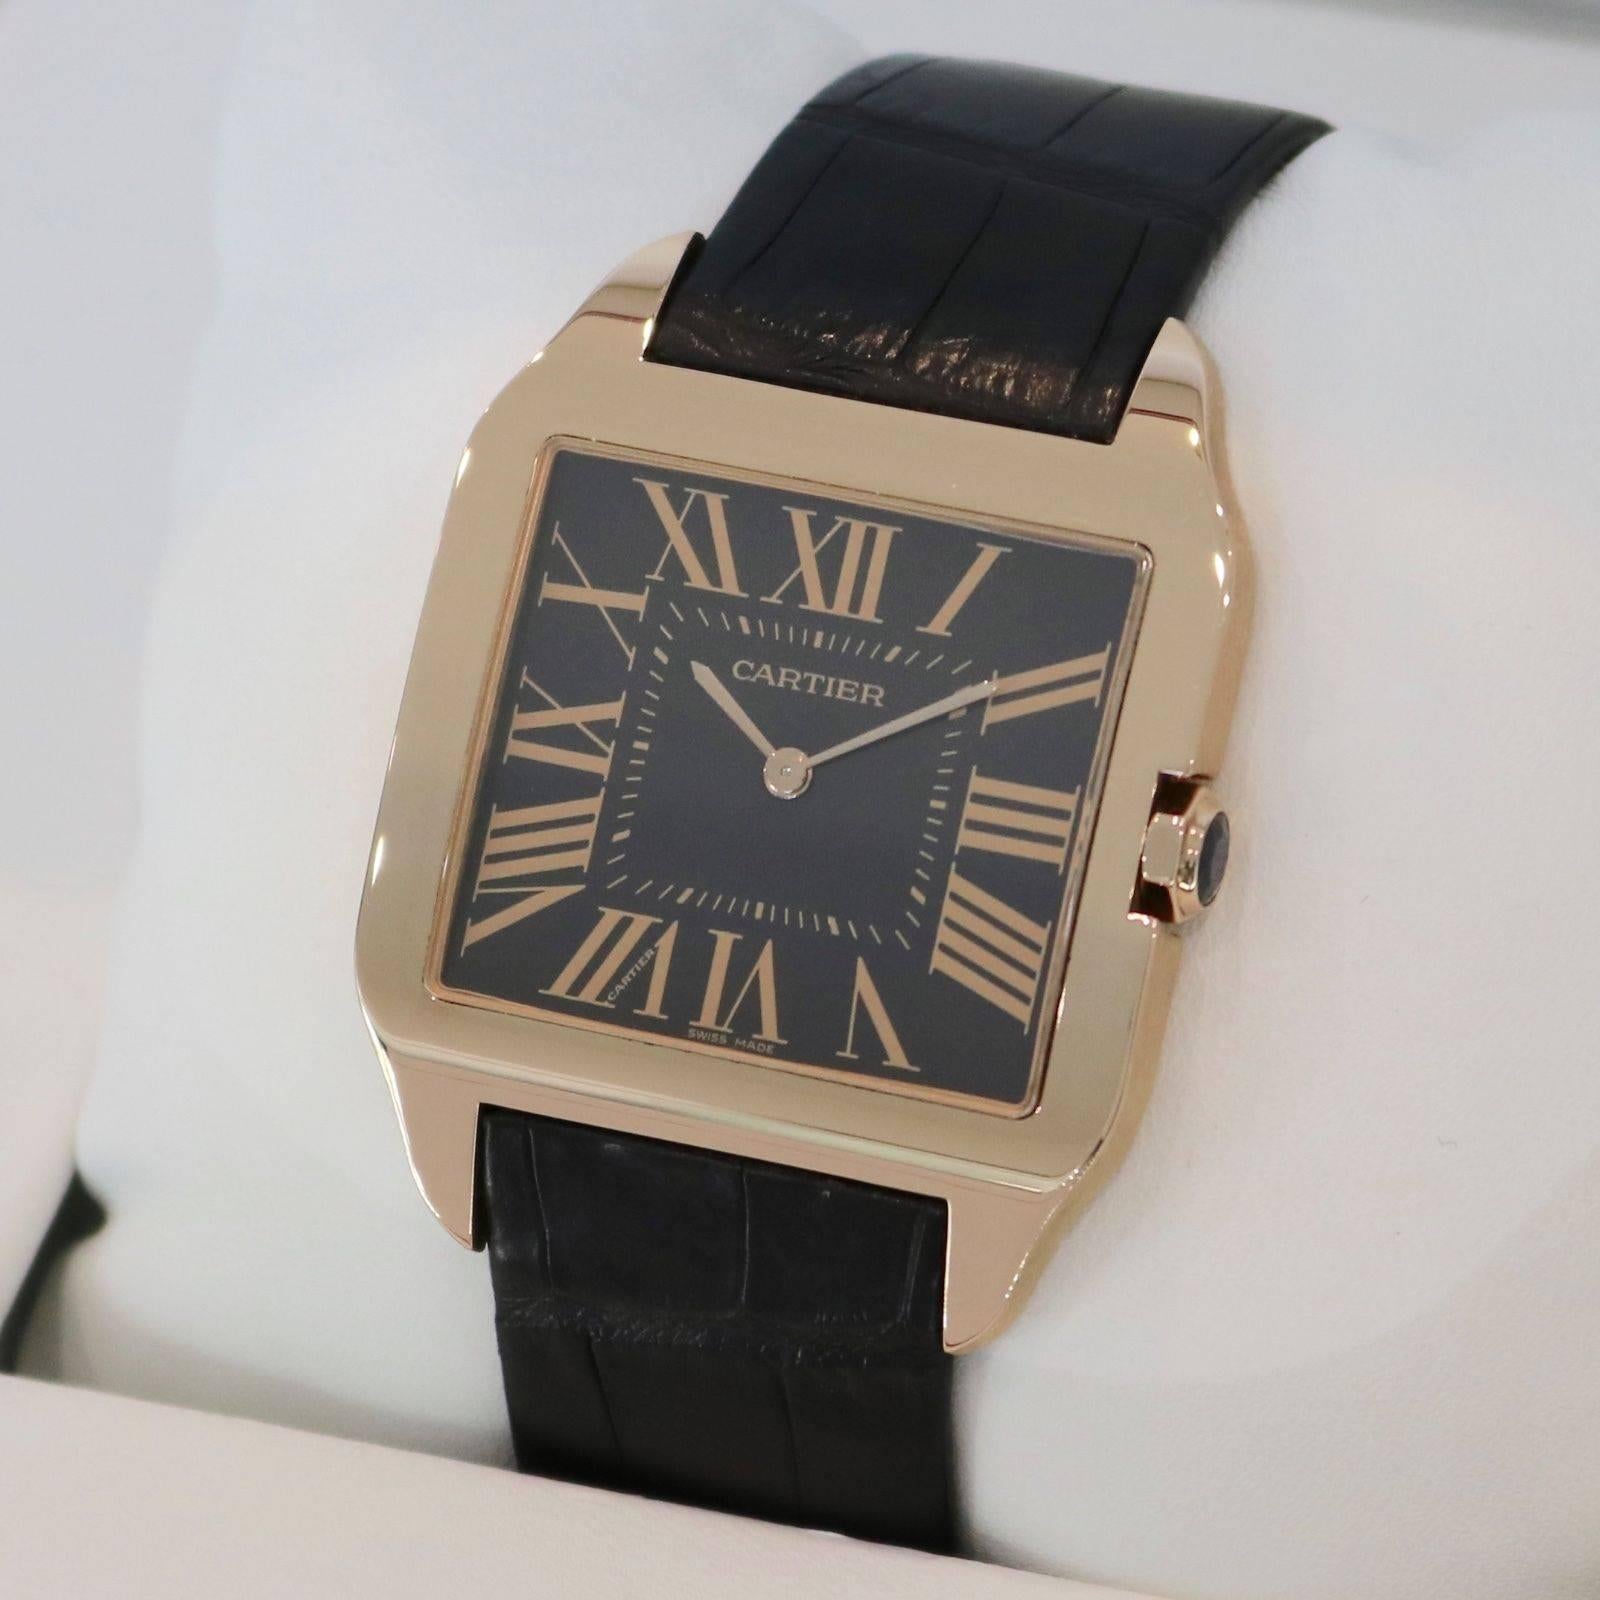 Brand Name:  Cartier
Style Number:  W2012851
Series:  Santos Dumont Large
Gender:  Men's
Case Material:  18k Rose Gold
Dial Color:  Chocolate Brown
Movement:  Hand Wind
Engine:  Cal. 430 MC
Functions:  Hours, Minutes
Crystal Material:  Sapphire
Case